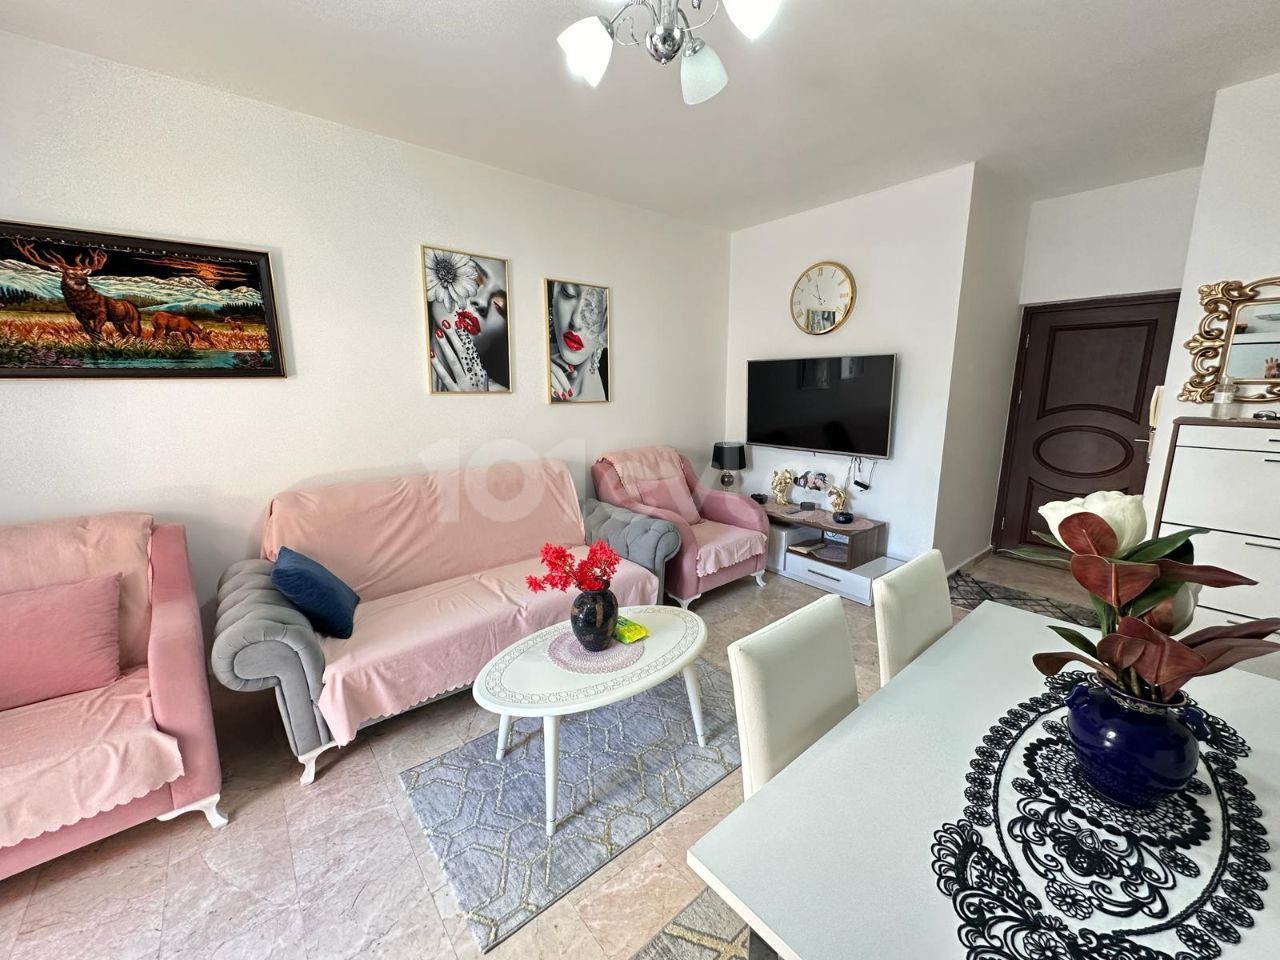 2+1 furnished flat in the Center 100.000 STG / 0548 823 96 10